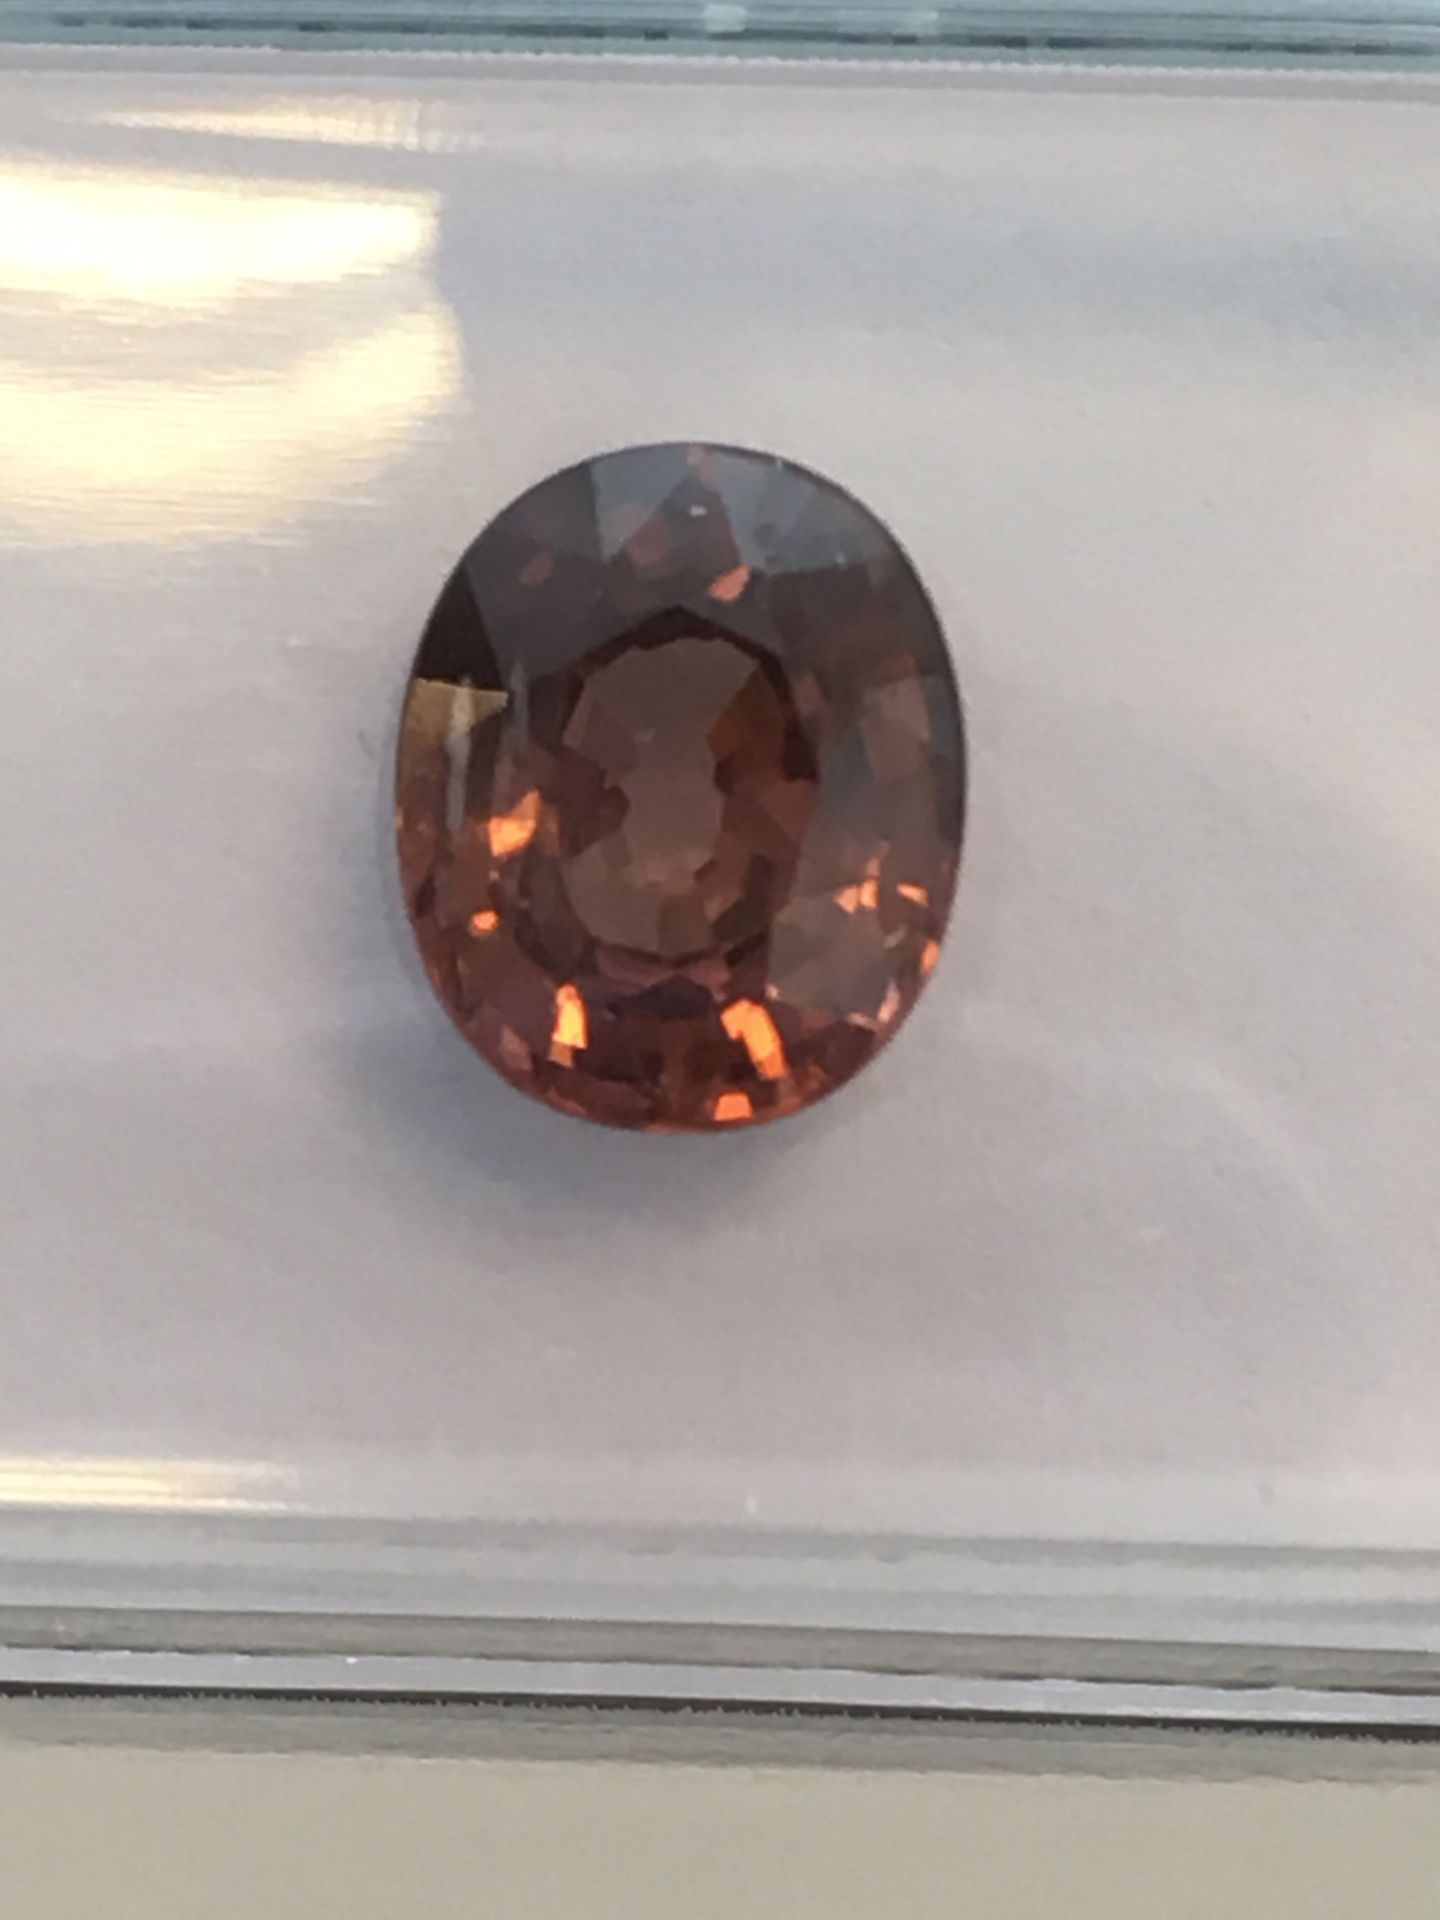 2.13ct Natural Zircon with IGI Certificate - Report No' 250600667. Oval Mixed Cut in Deep Brownish